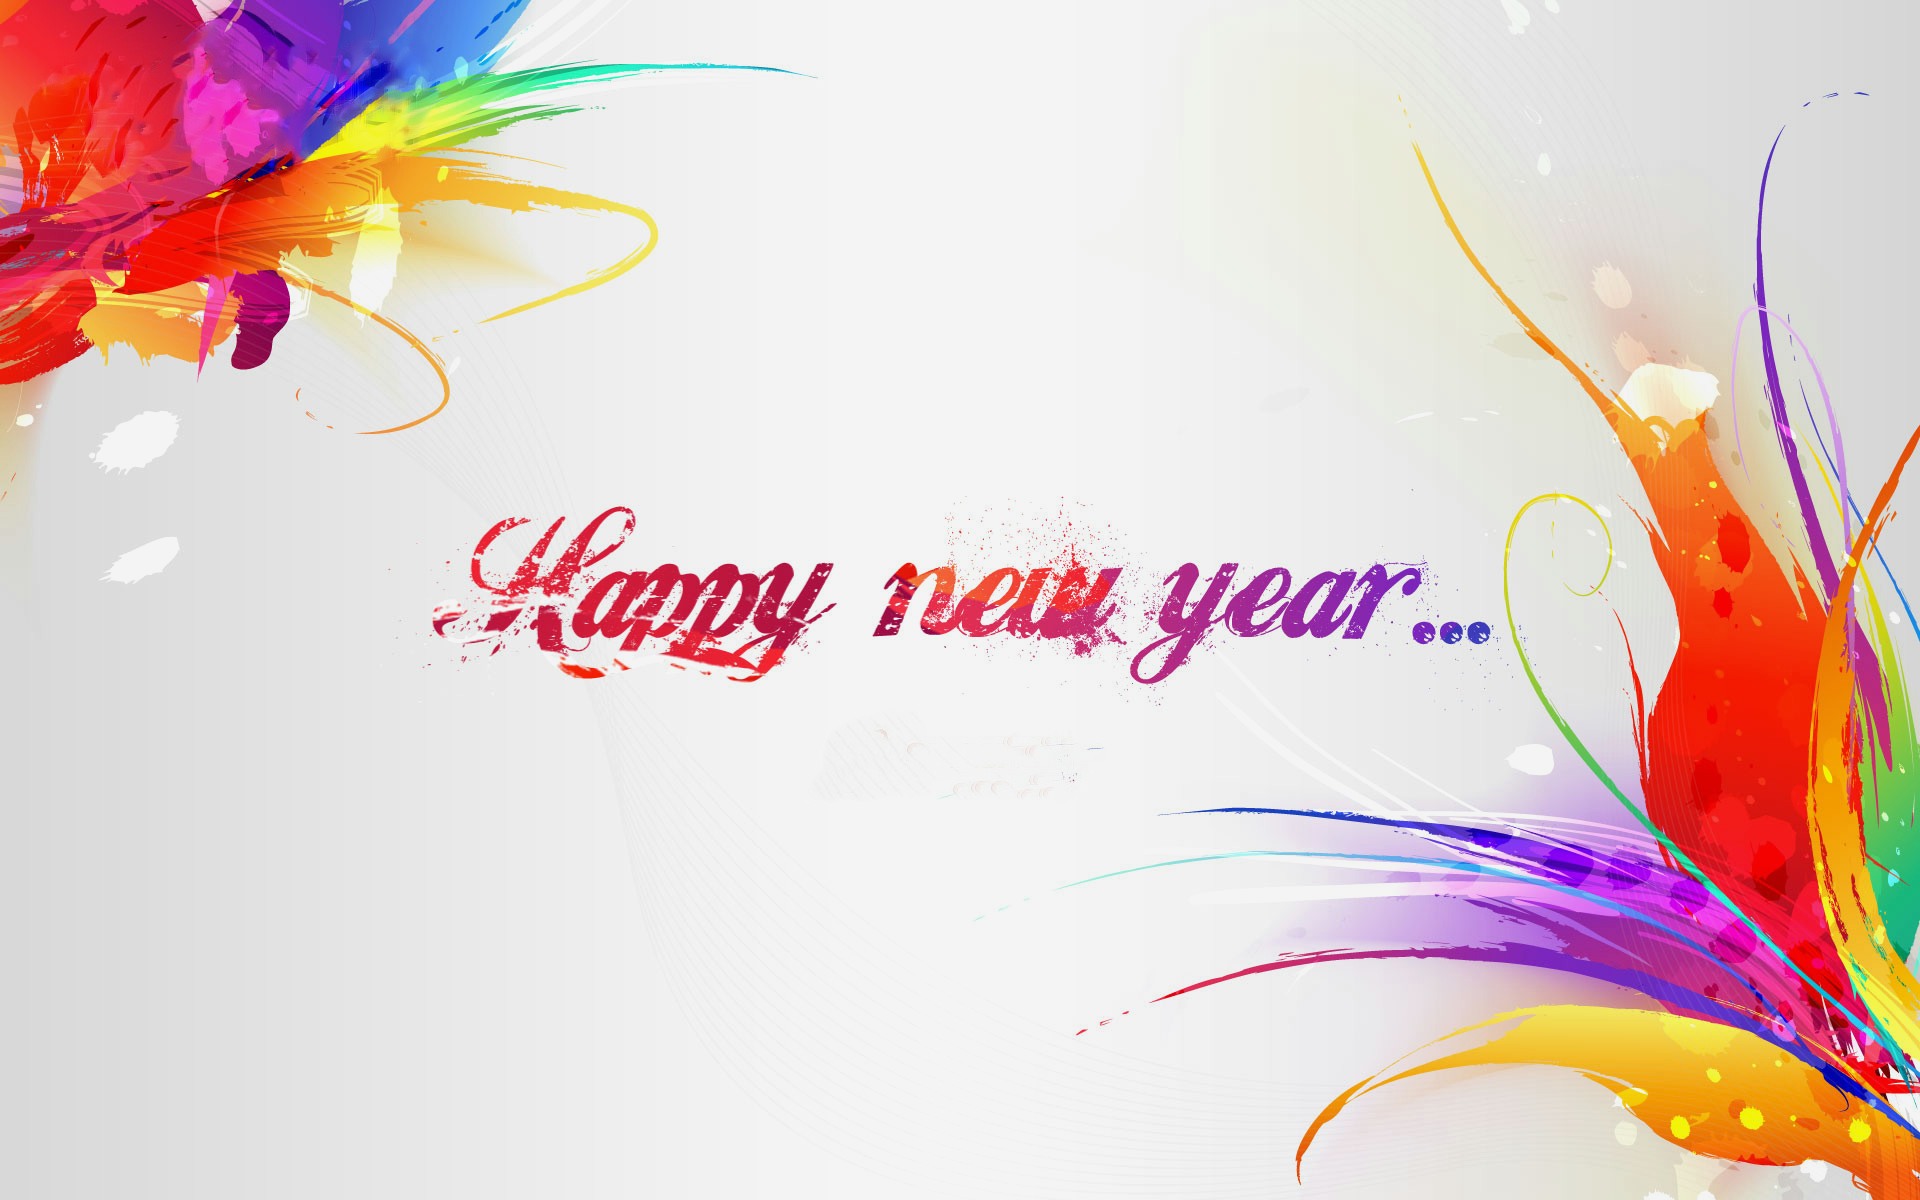 2016 Happy New Year Background Wallpapers9 - Happy New Year 2020 Wishes - HD Wallpaper 